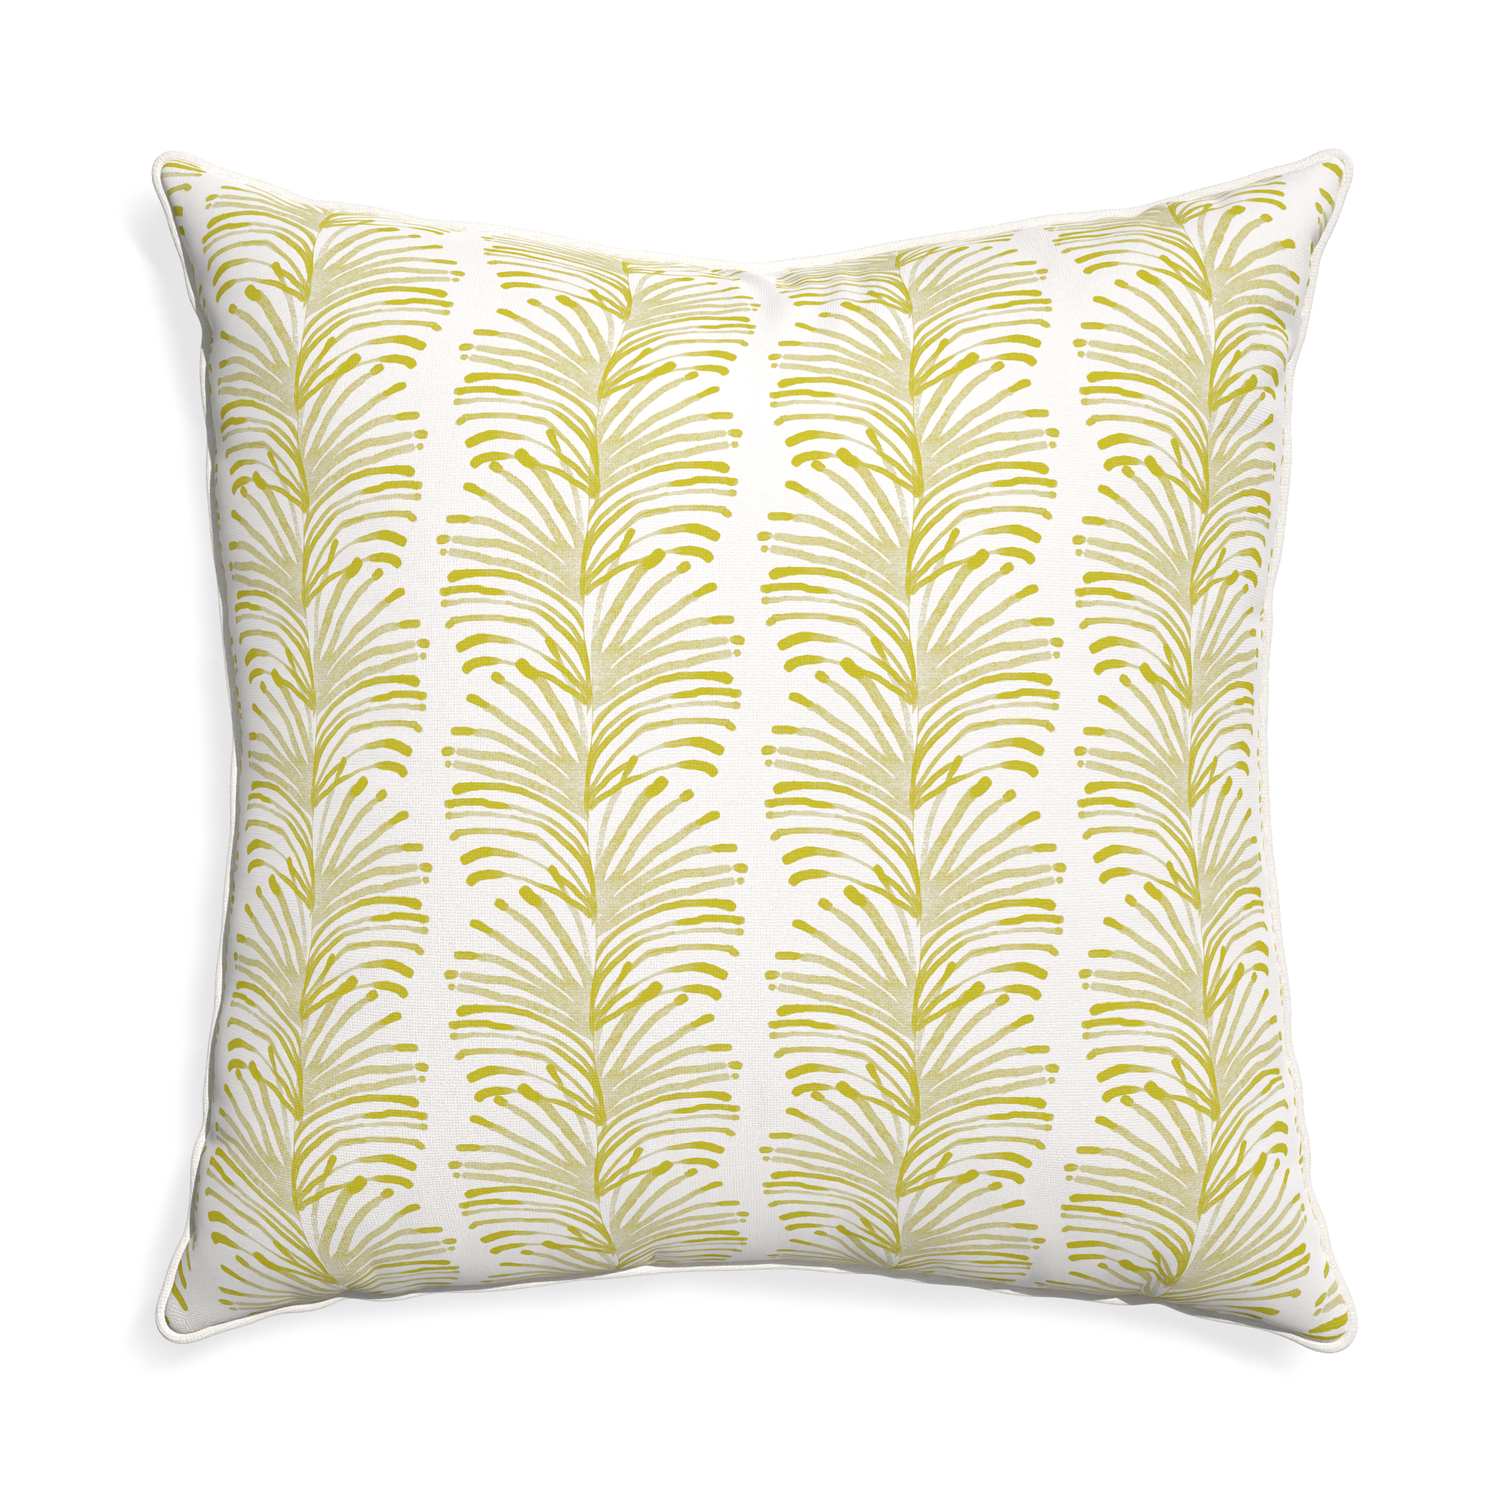 Euro-sham emma chartreuse custom yellow stripe chartreusepillow with snow piping on white background